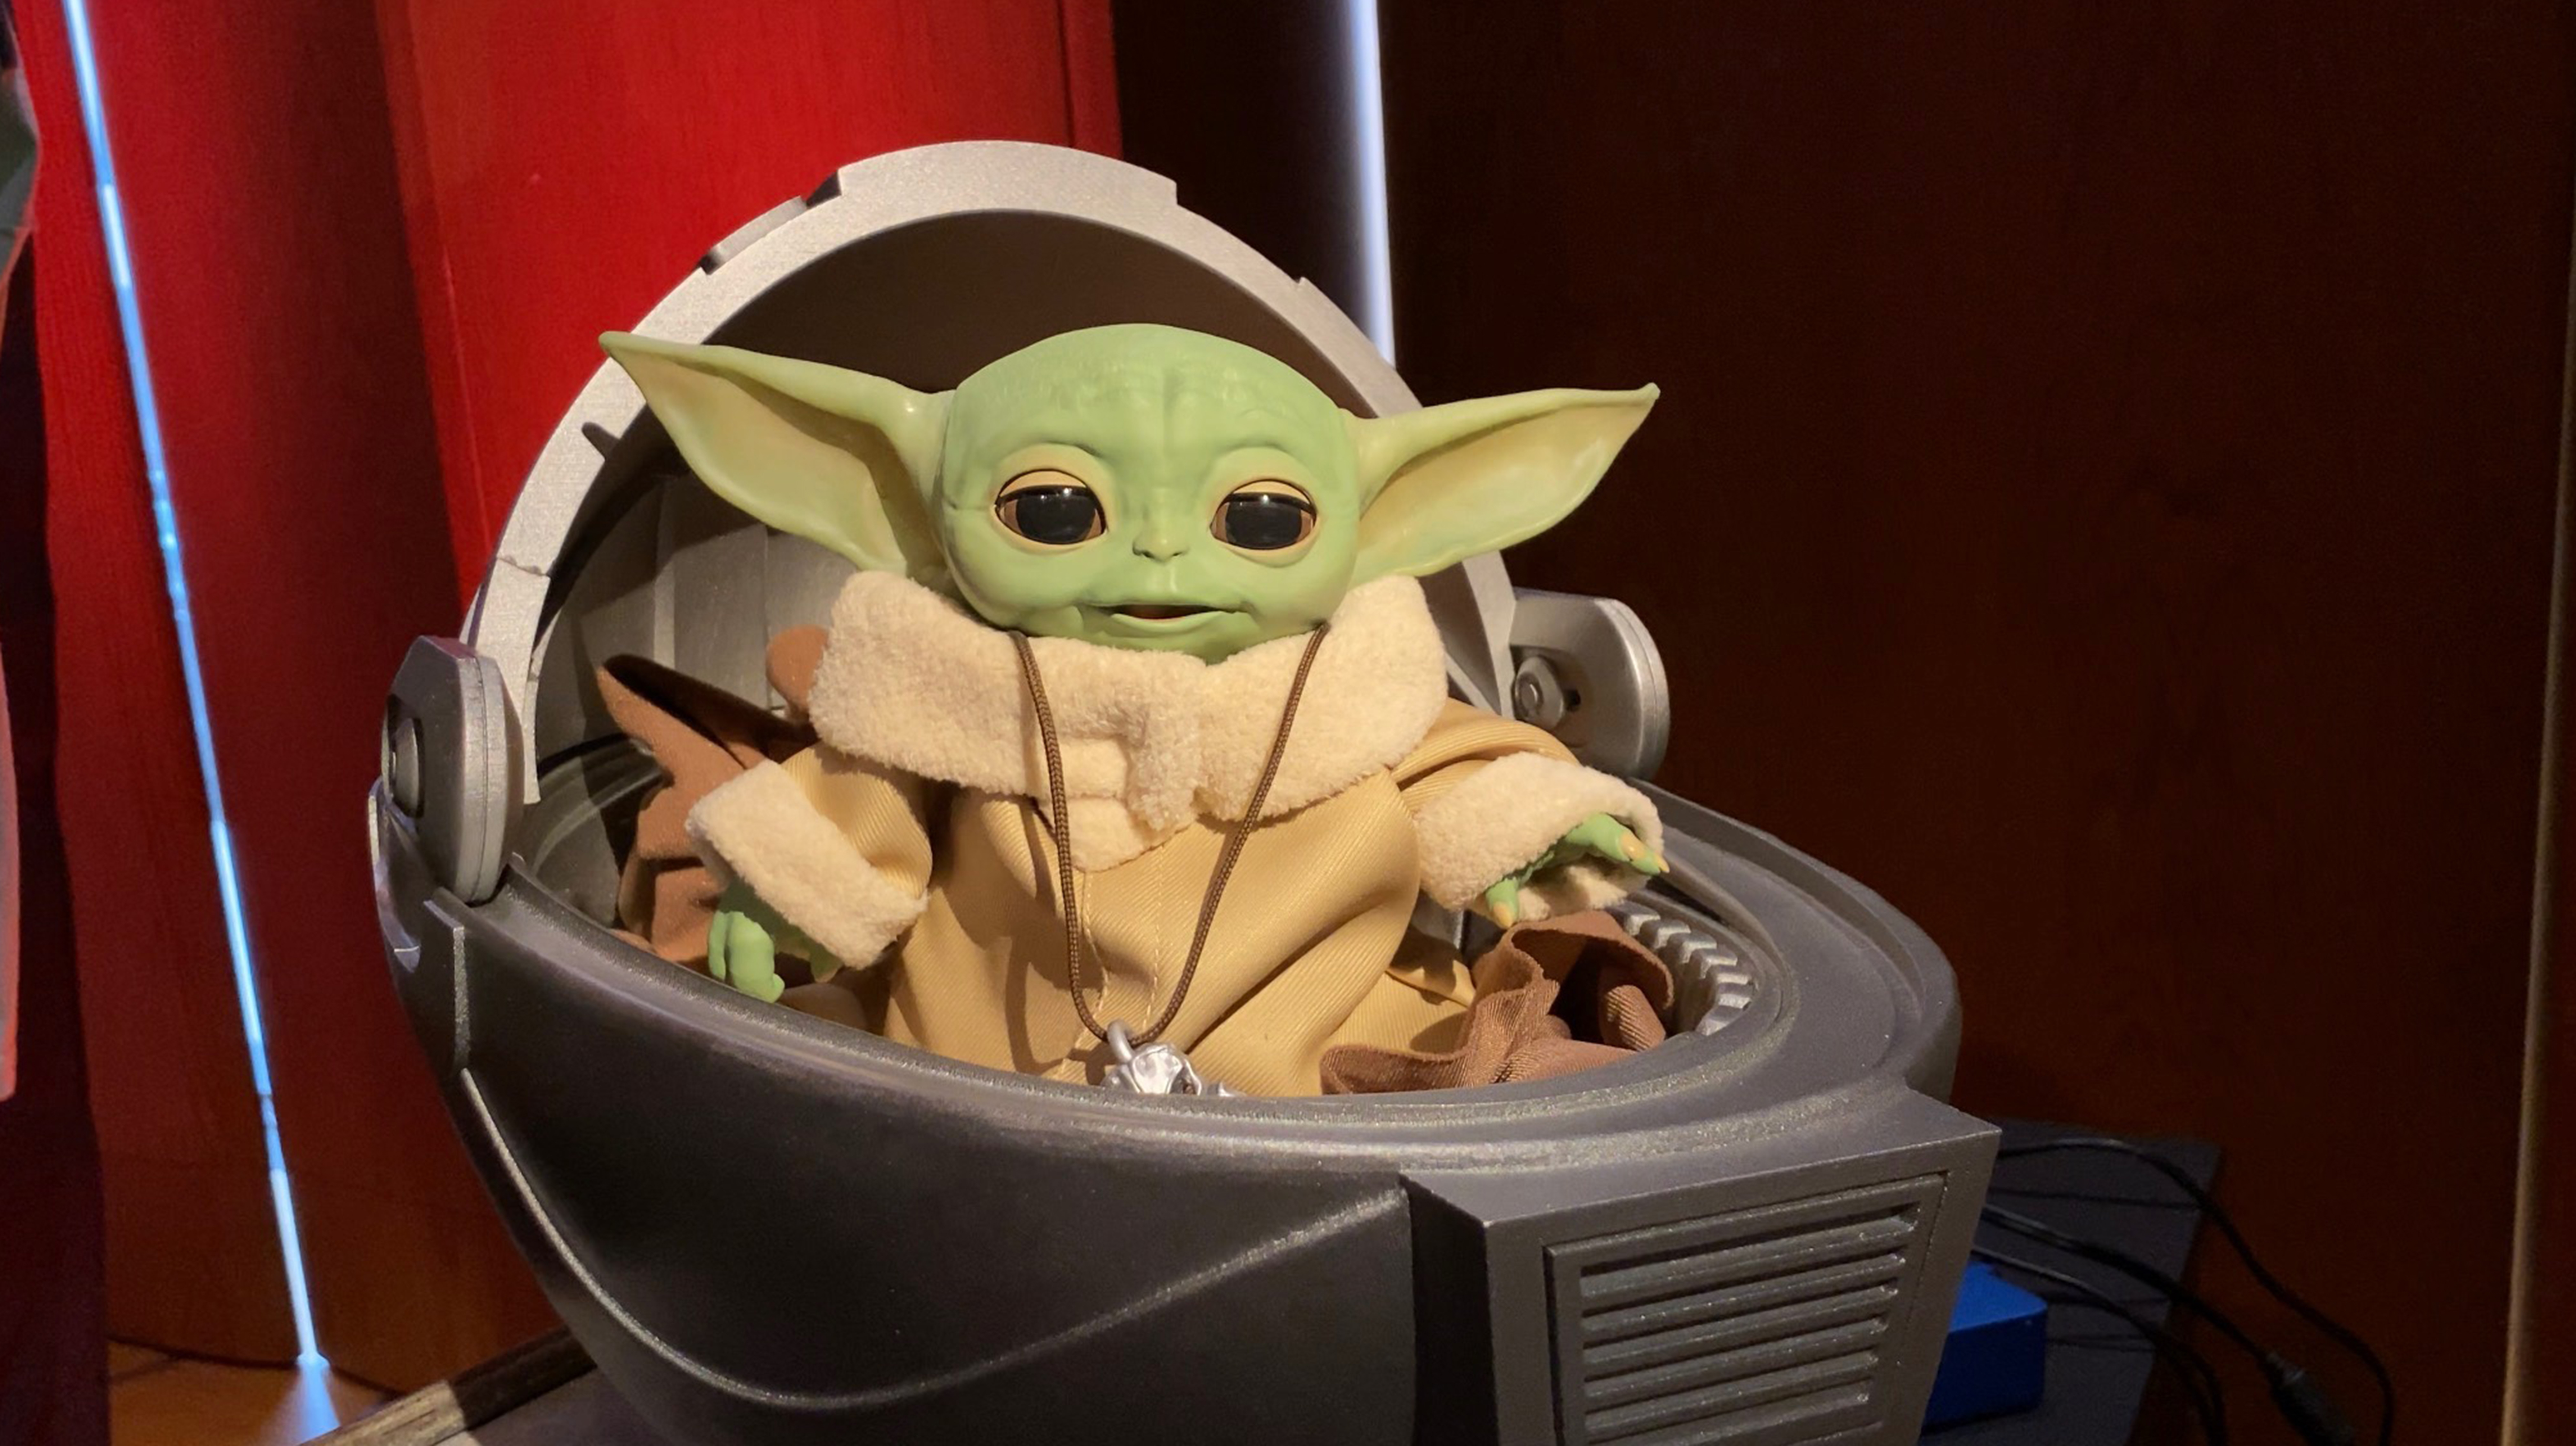 Hasbro S Animatronic Baby Yoda Is Up For Preorder Now Cnn Underscored